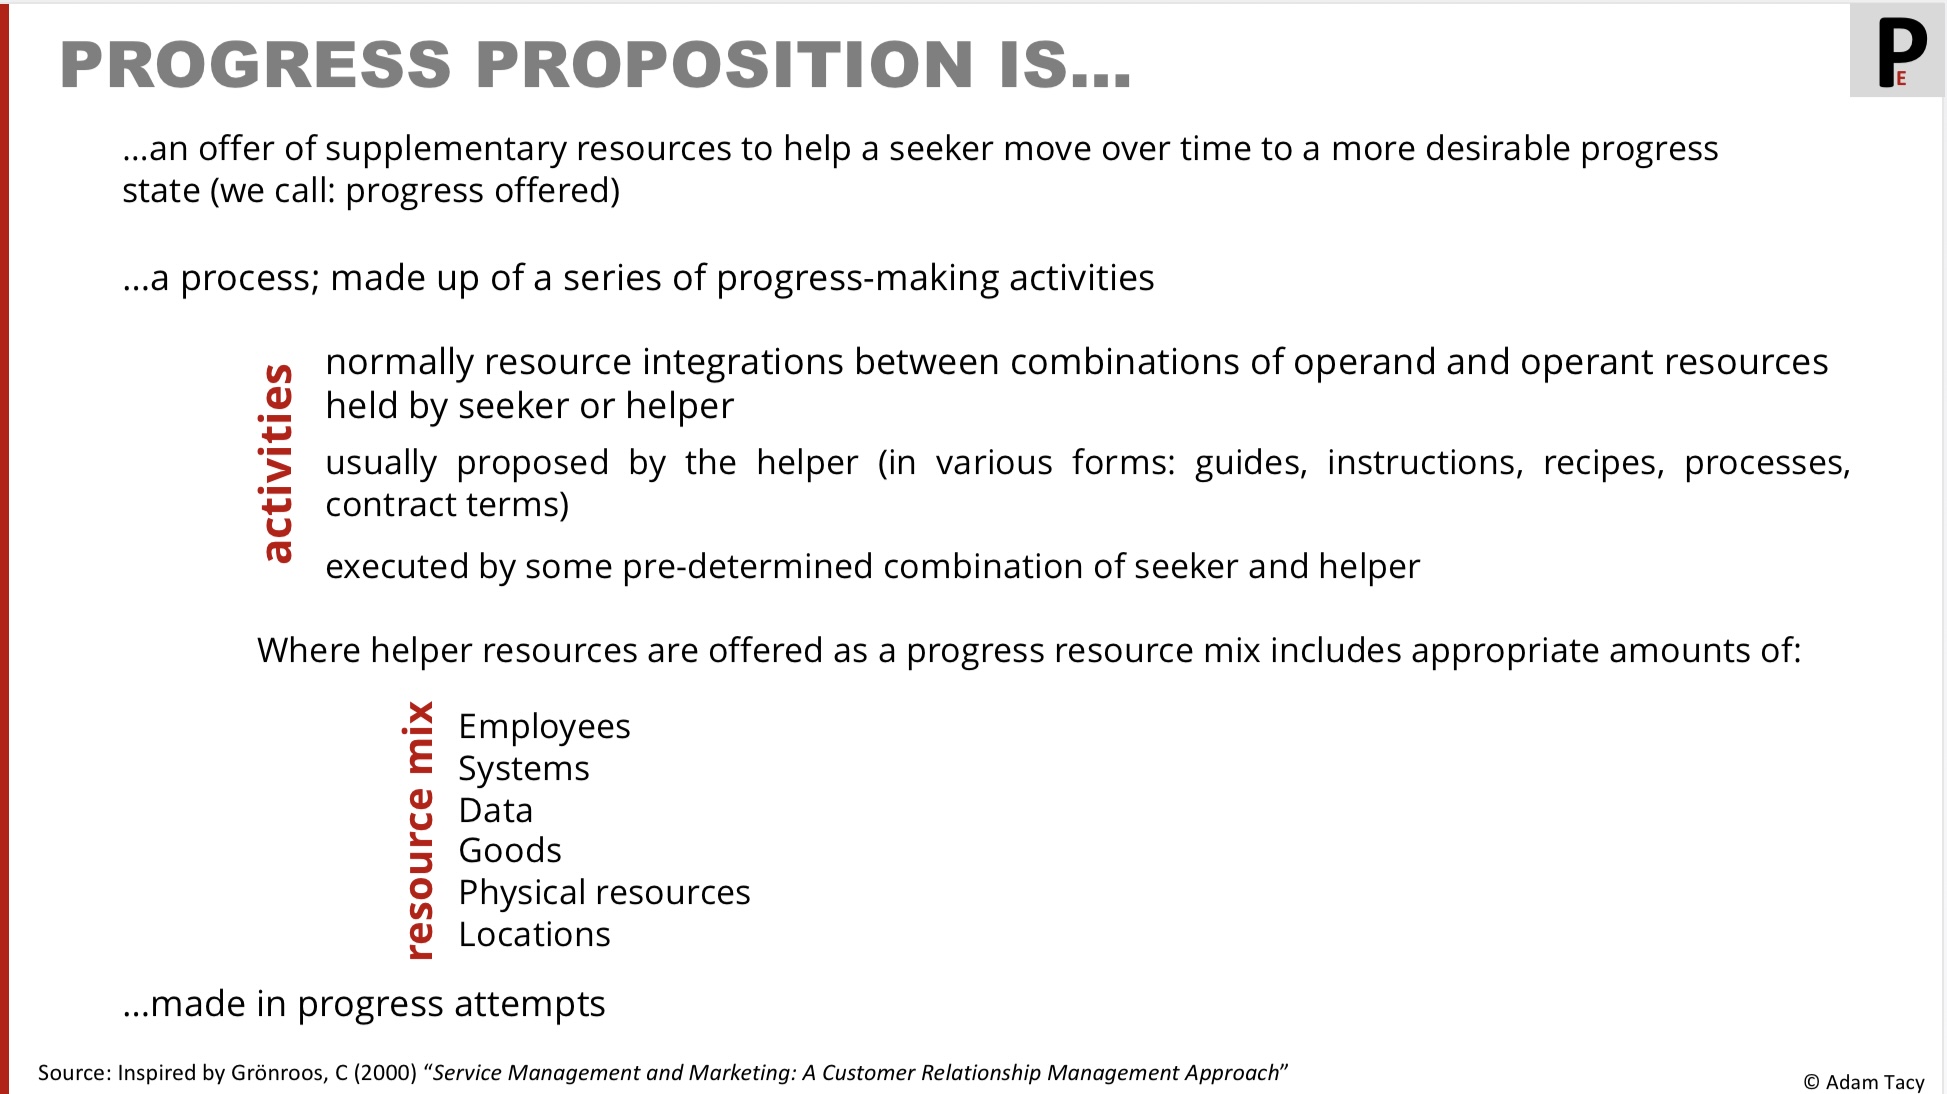 Definition of a progress proposition as a set of activities integrating with a service mix